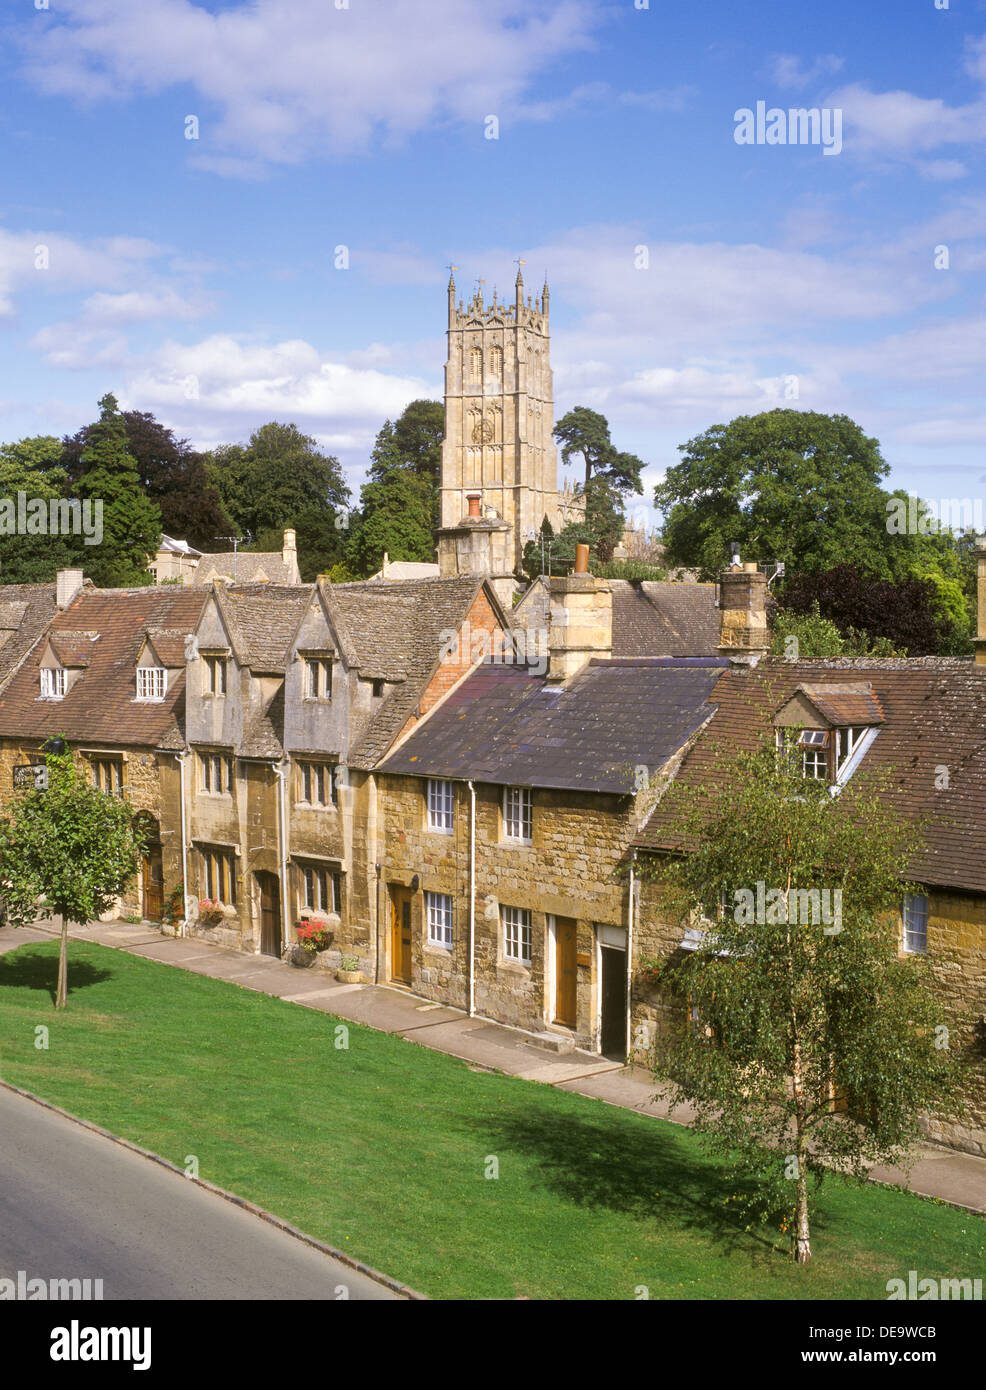 The High Street and St James church in the Cotswold town of Chipping Campden, Gloucestershire, UK Stock Photo